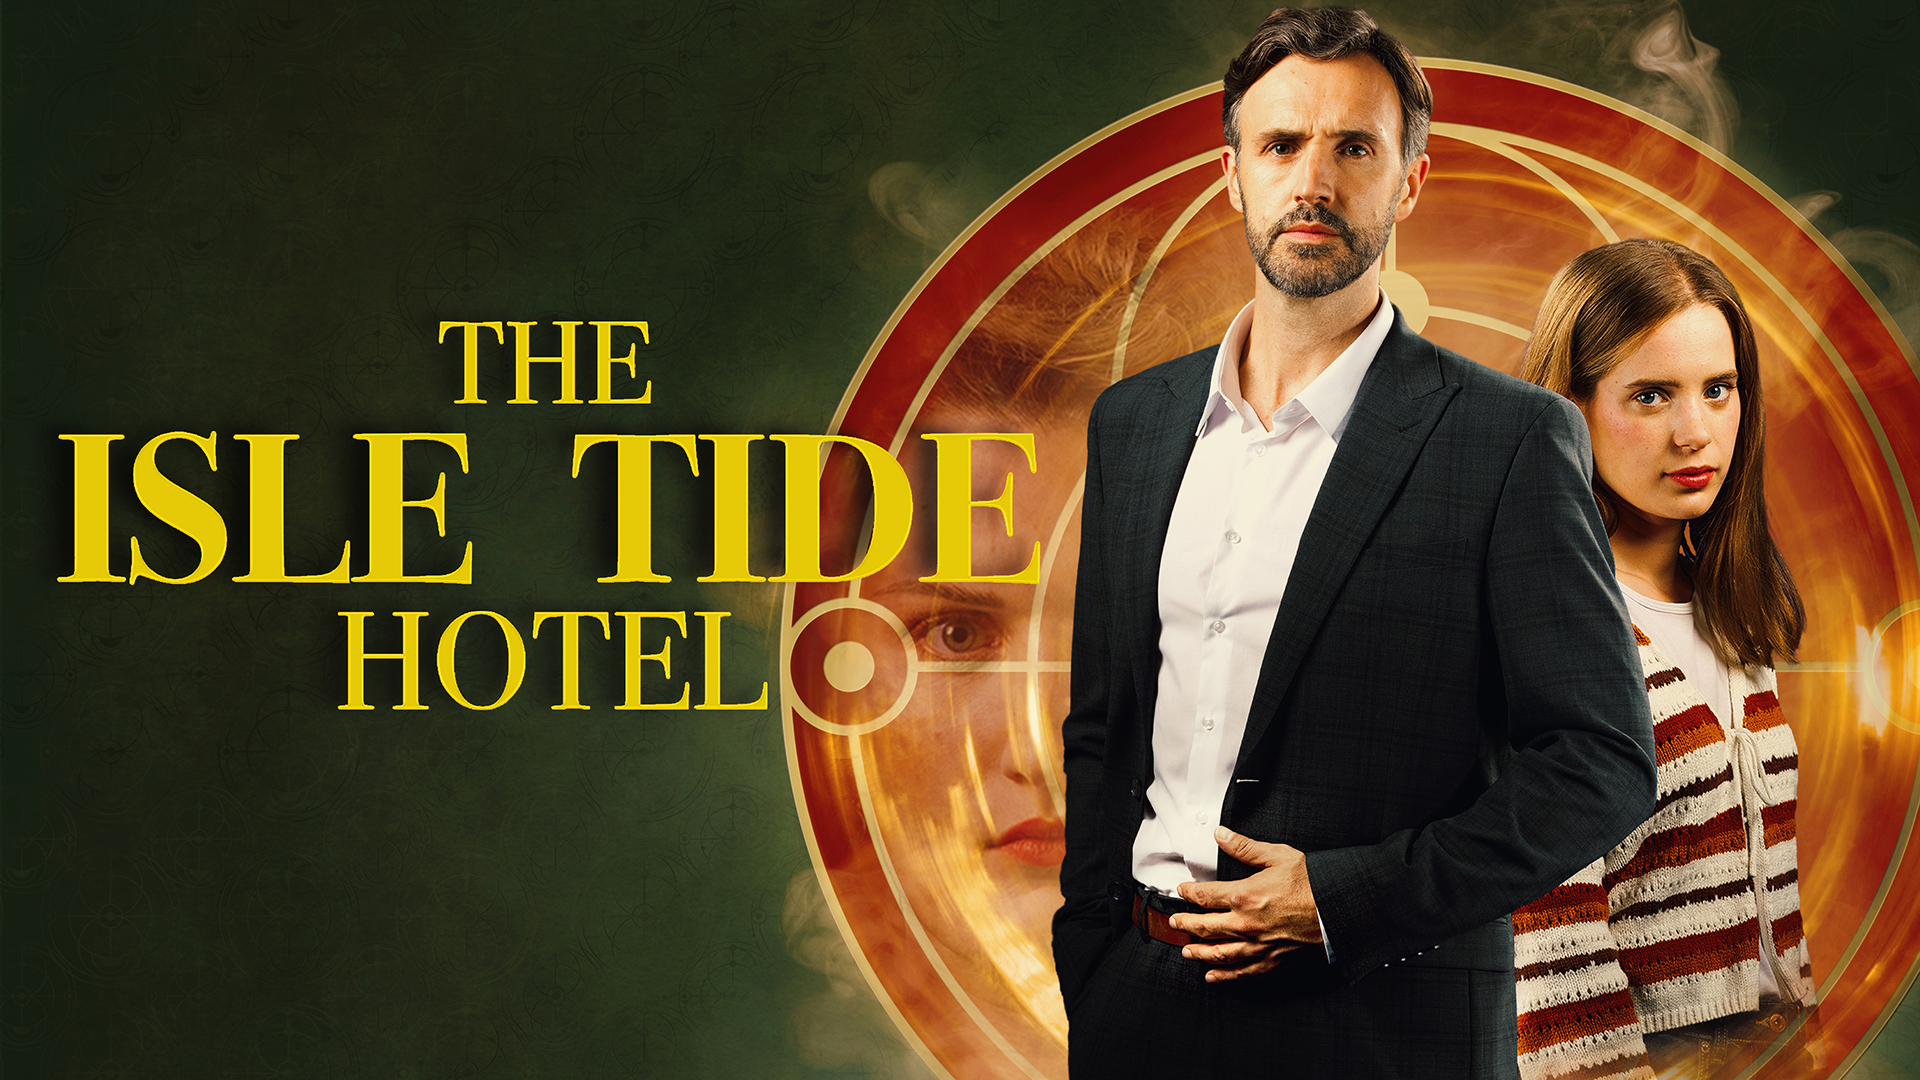 A man and his teenaged daughter stand to the right of the logo, which reads The Isle Tide Hotel.